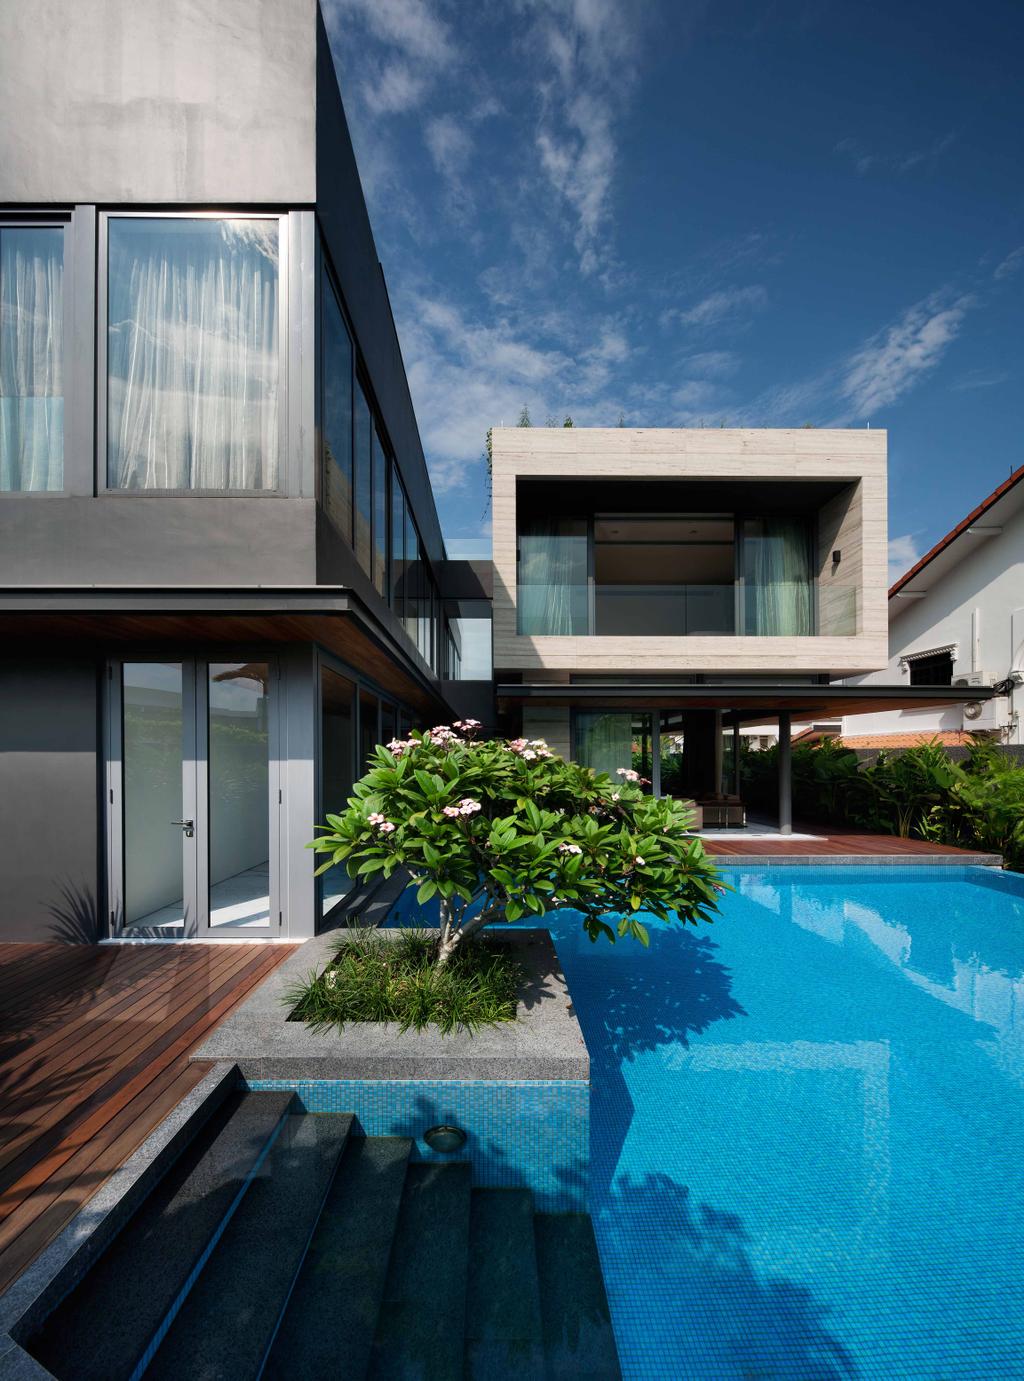 Minimalist, Landed, Serangoon (Travertine Dream House), Architect, Wallflower Architecture + Design, Square Architecture, Black Wall, Plants, Steps, Wooden Flooring, Indoor Pool, House Pool, Private Pool, Pool, Porch, Bonsai, Flora, Jar, Plant, Potted Plant, Pottery, Tree, Vase, Architecture, Building, Housing